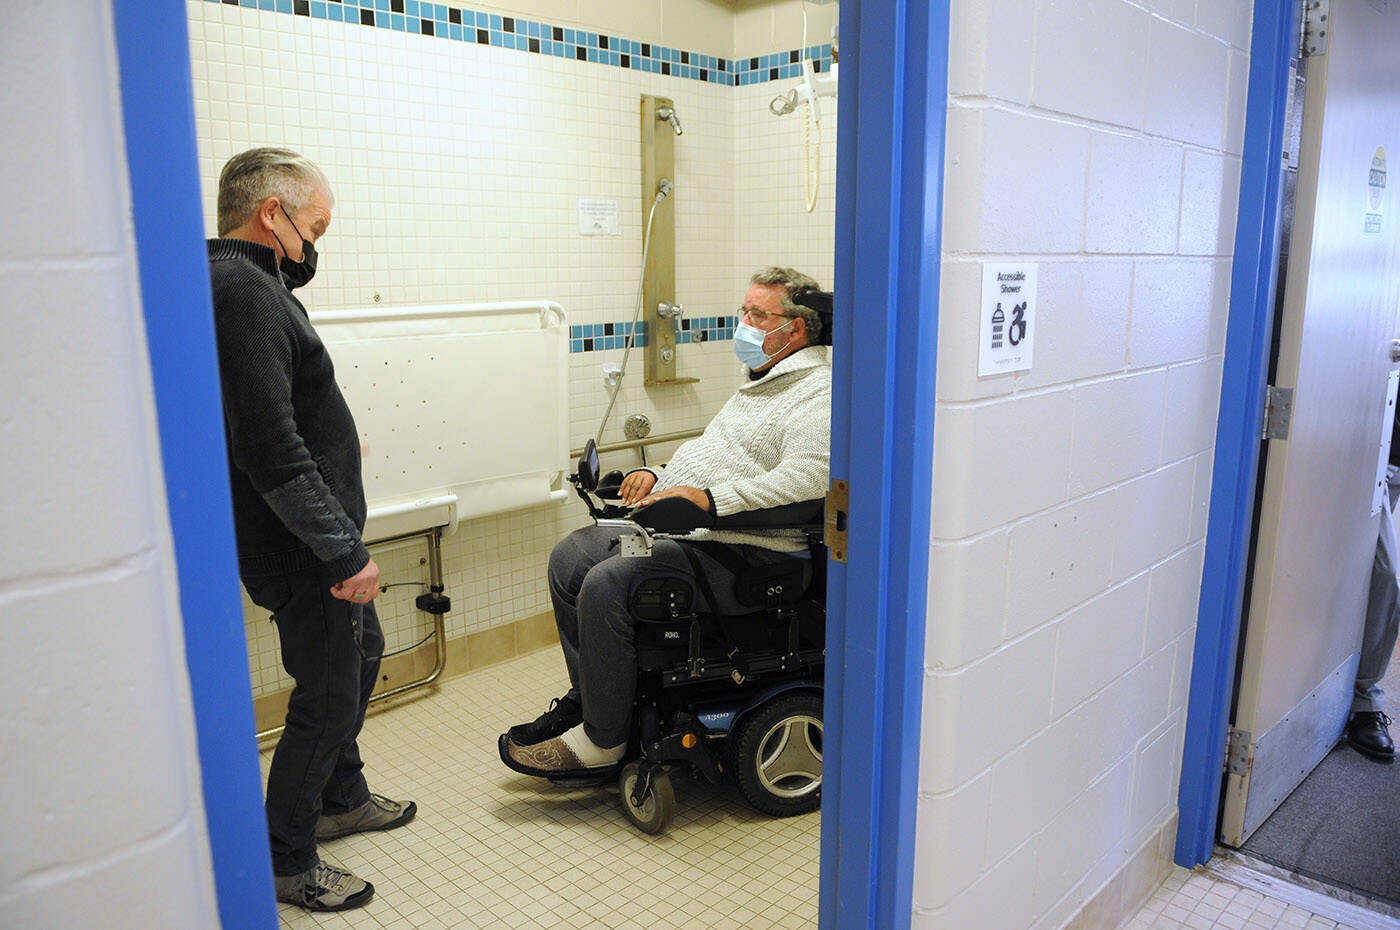 Jim Ryan (right) and Mayor Ken Popove chat during a tour of the Cheam Leisure Centre on Wednesday, Nov. 10, 2021. Ryan was pointing out some of the features at the centre that earned it the Rick Hansen Foundation Accessibility Certified Gold rating, like this accessible shower with a lift. (Jenna Hauck/ Chilliwack Progress)